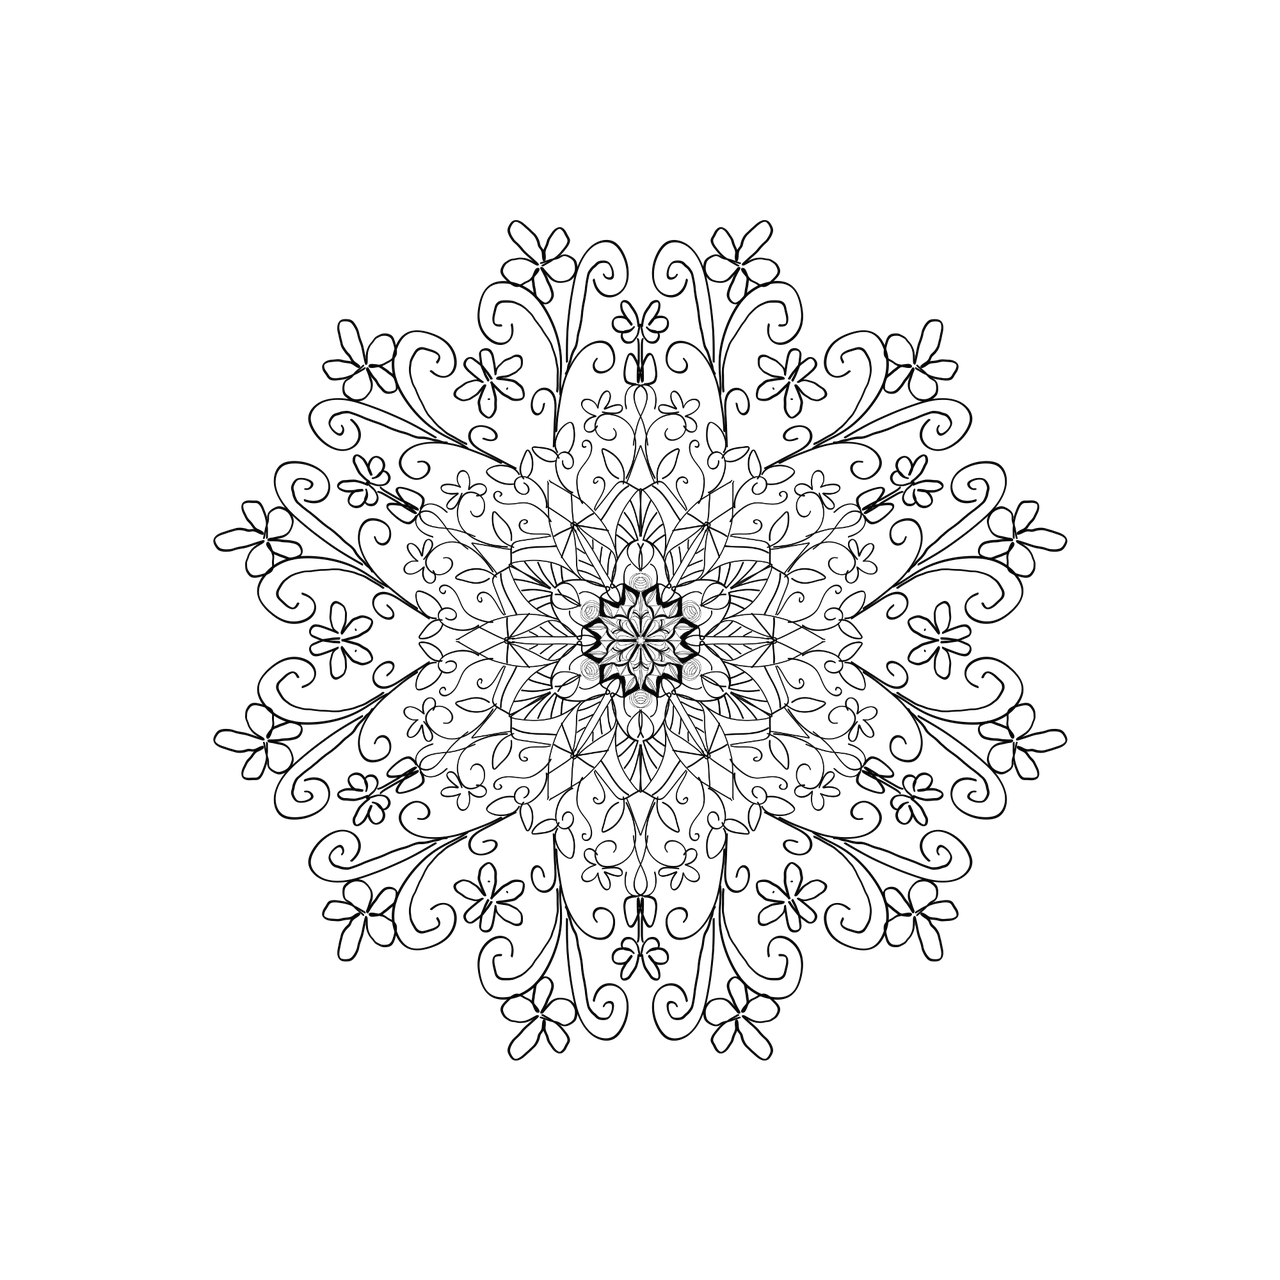 a black and white image of a snowflake, inspired by Otto Frölicher, generative art, dark flower pattern wallpaper, plain black background, subtle lovecraftian vibes, drawn with photoshop